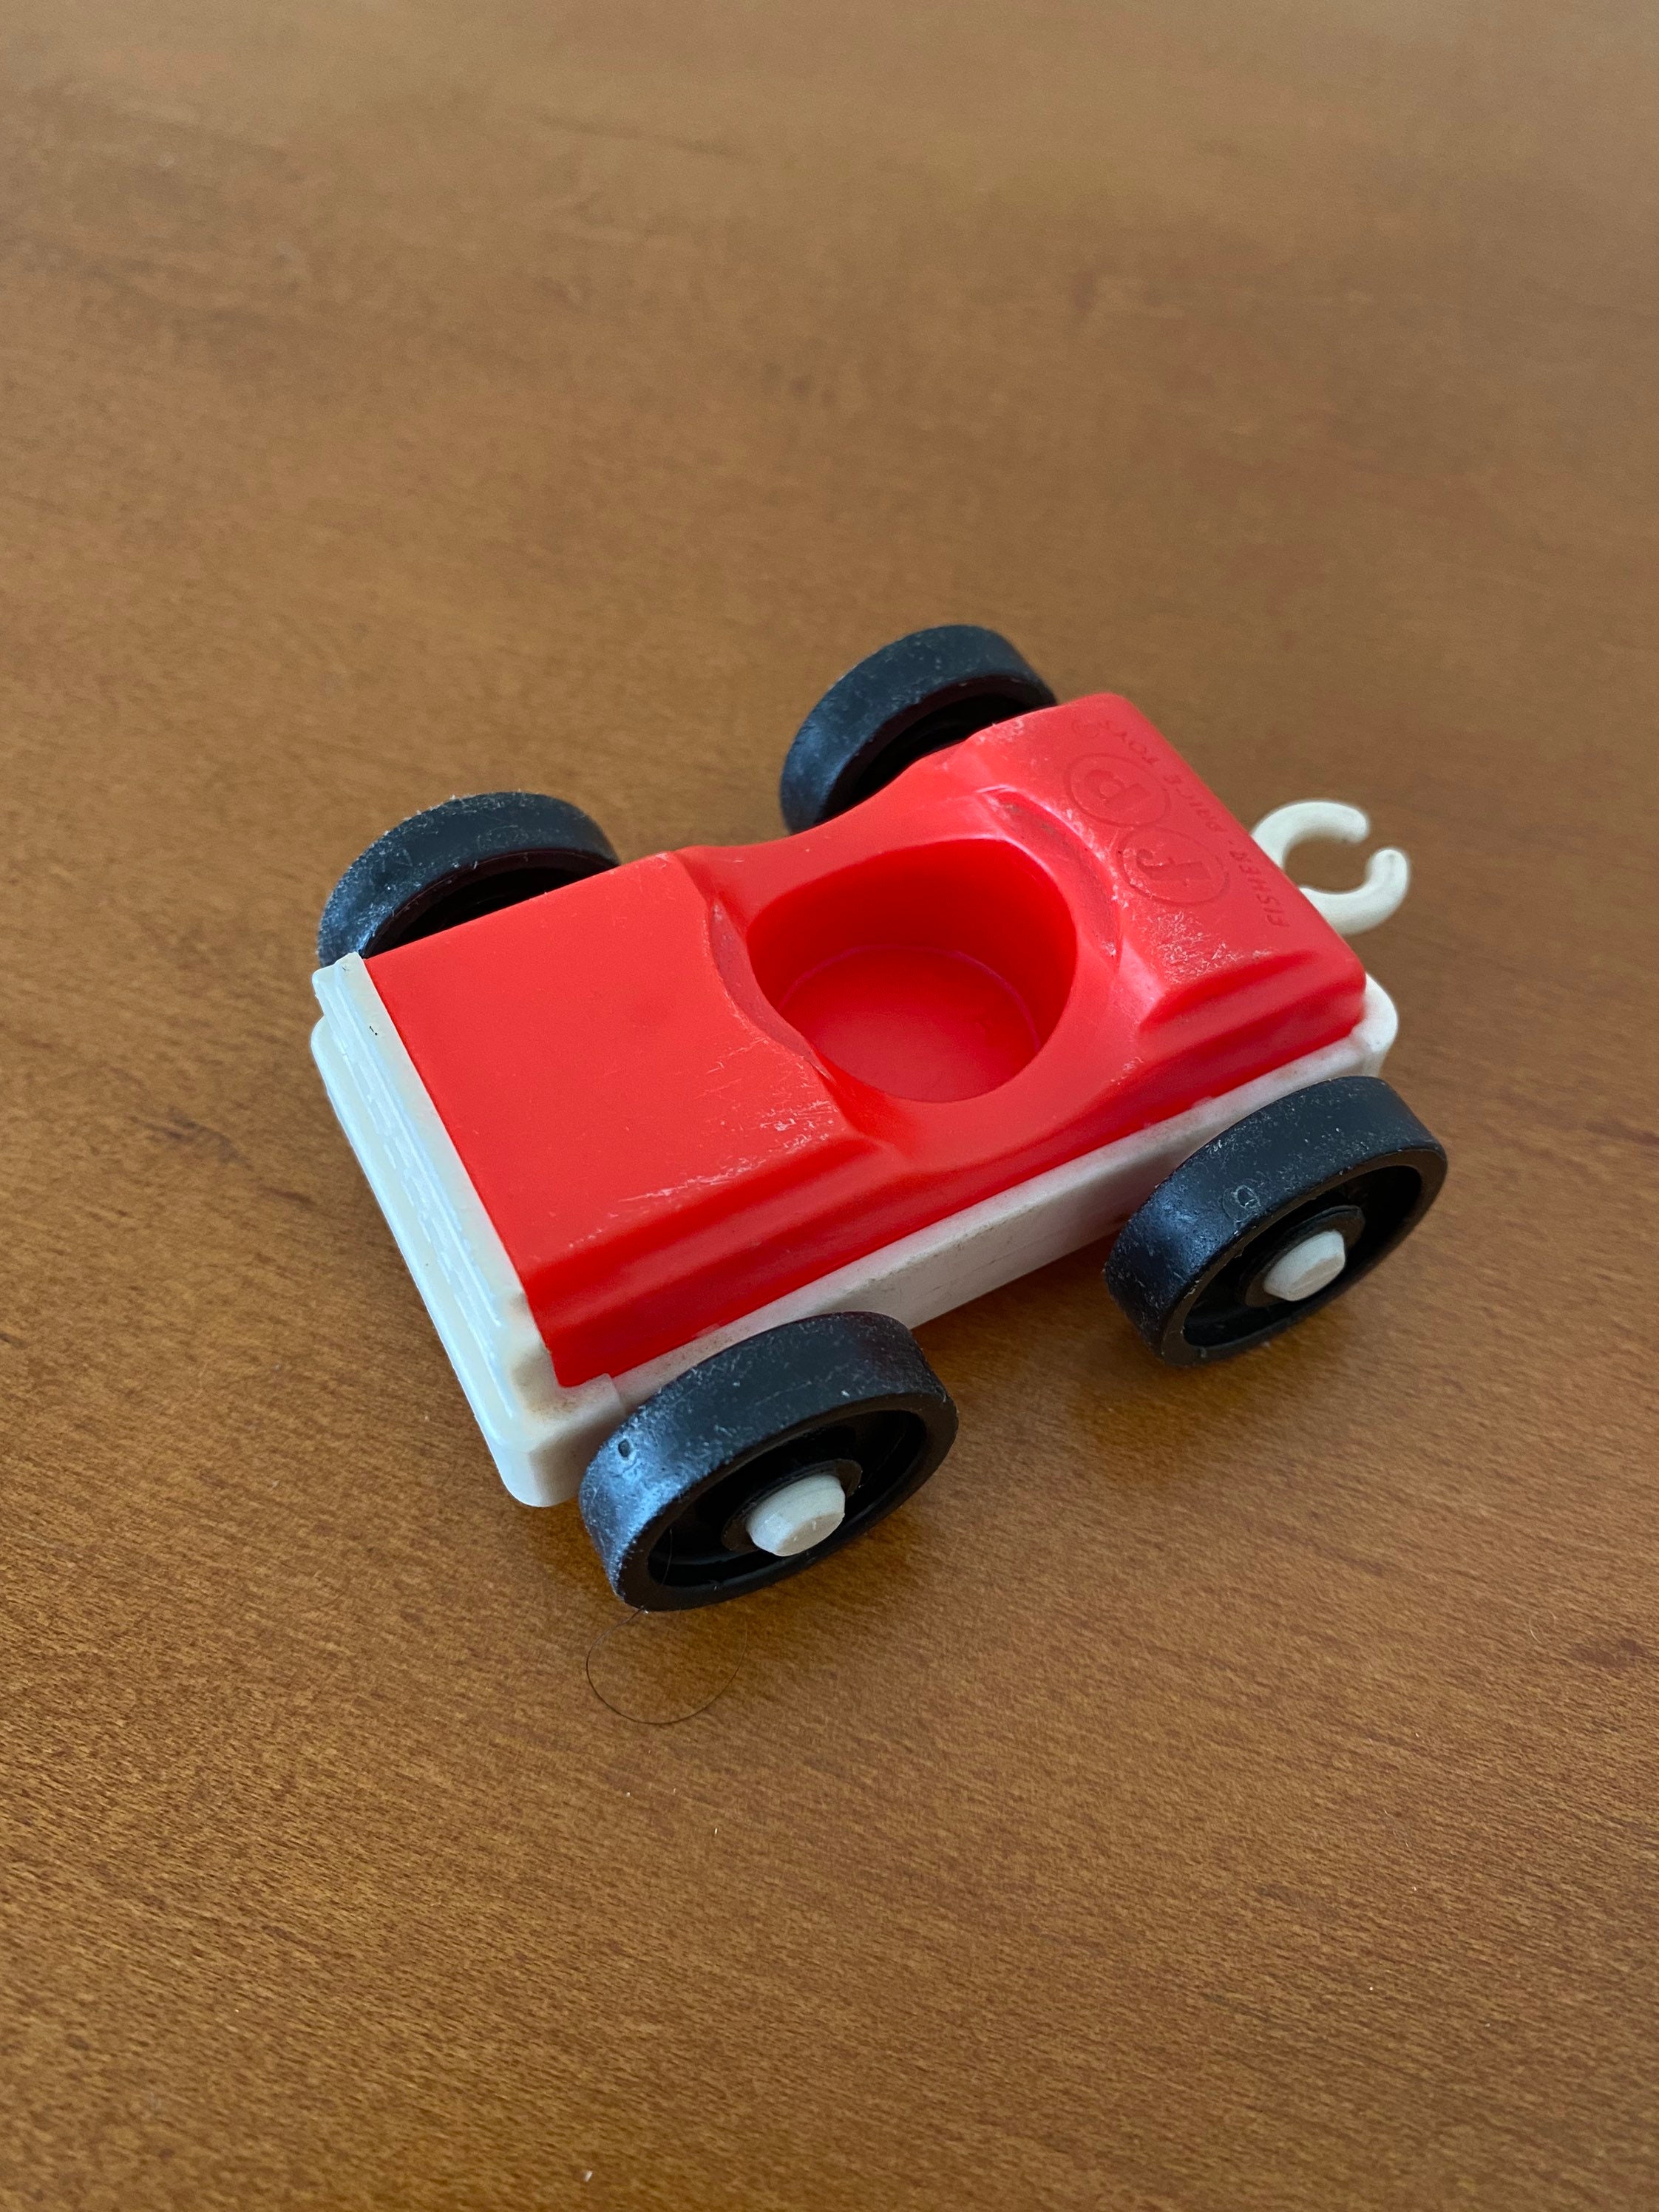 Details about   Fisher Price Little People Chunky Rare Red & White Car Vehicle 